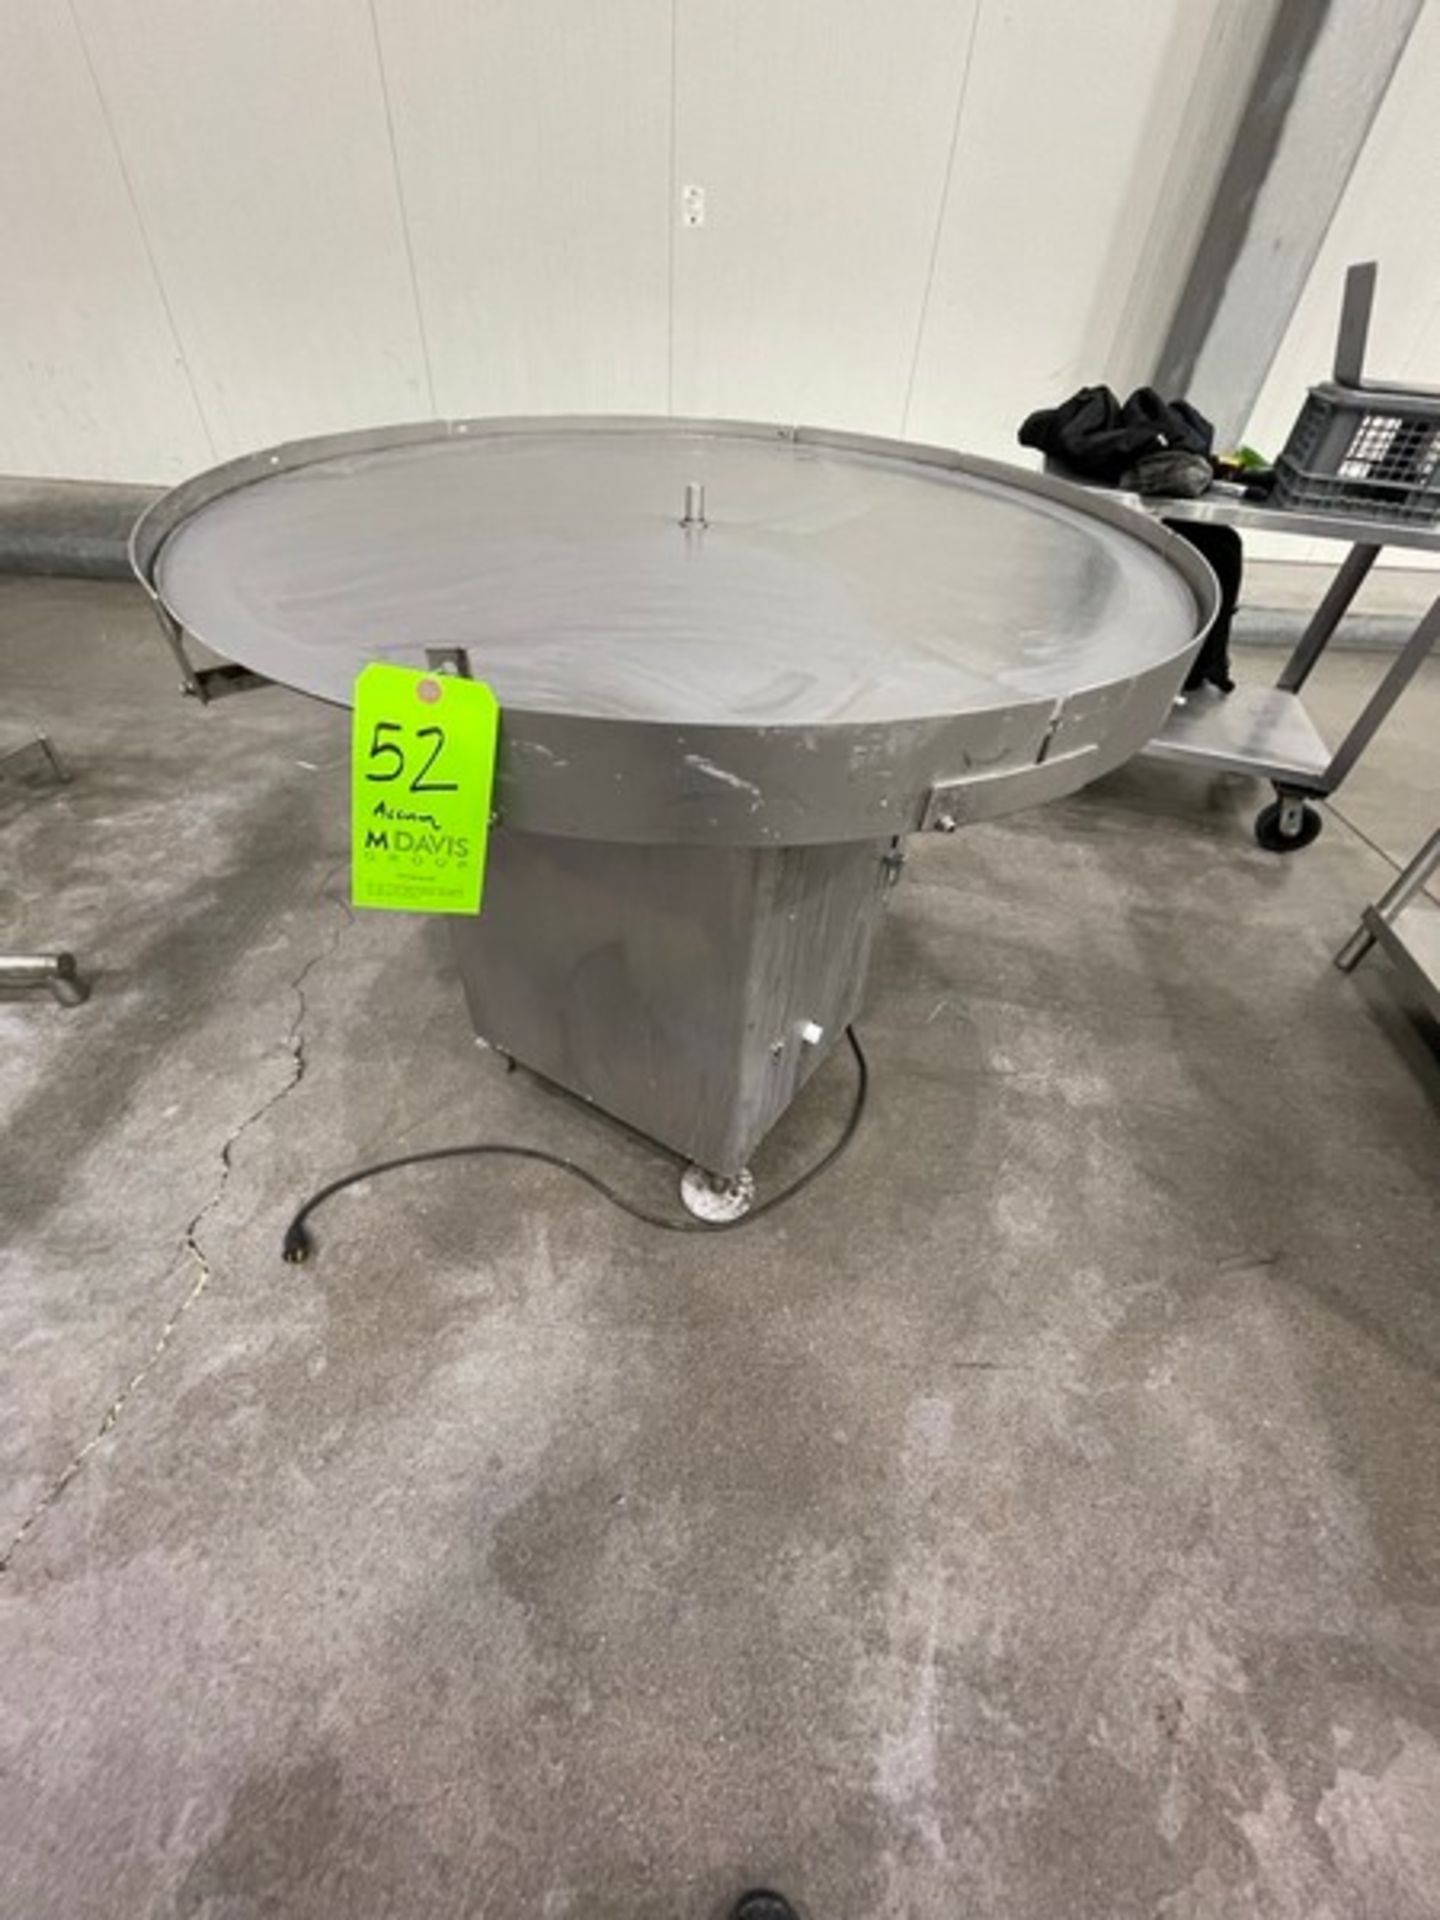 COZZOLI ROTARY ACCUMULATION / PACK OFF TABLE, S/N AT42-574, APPROX. 42" W (YOG52) (INV#84337)( - Image 2 of 10